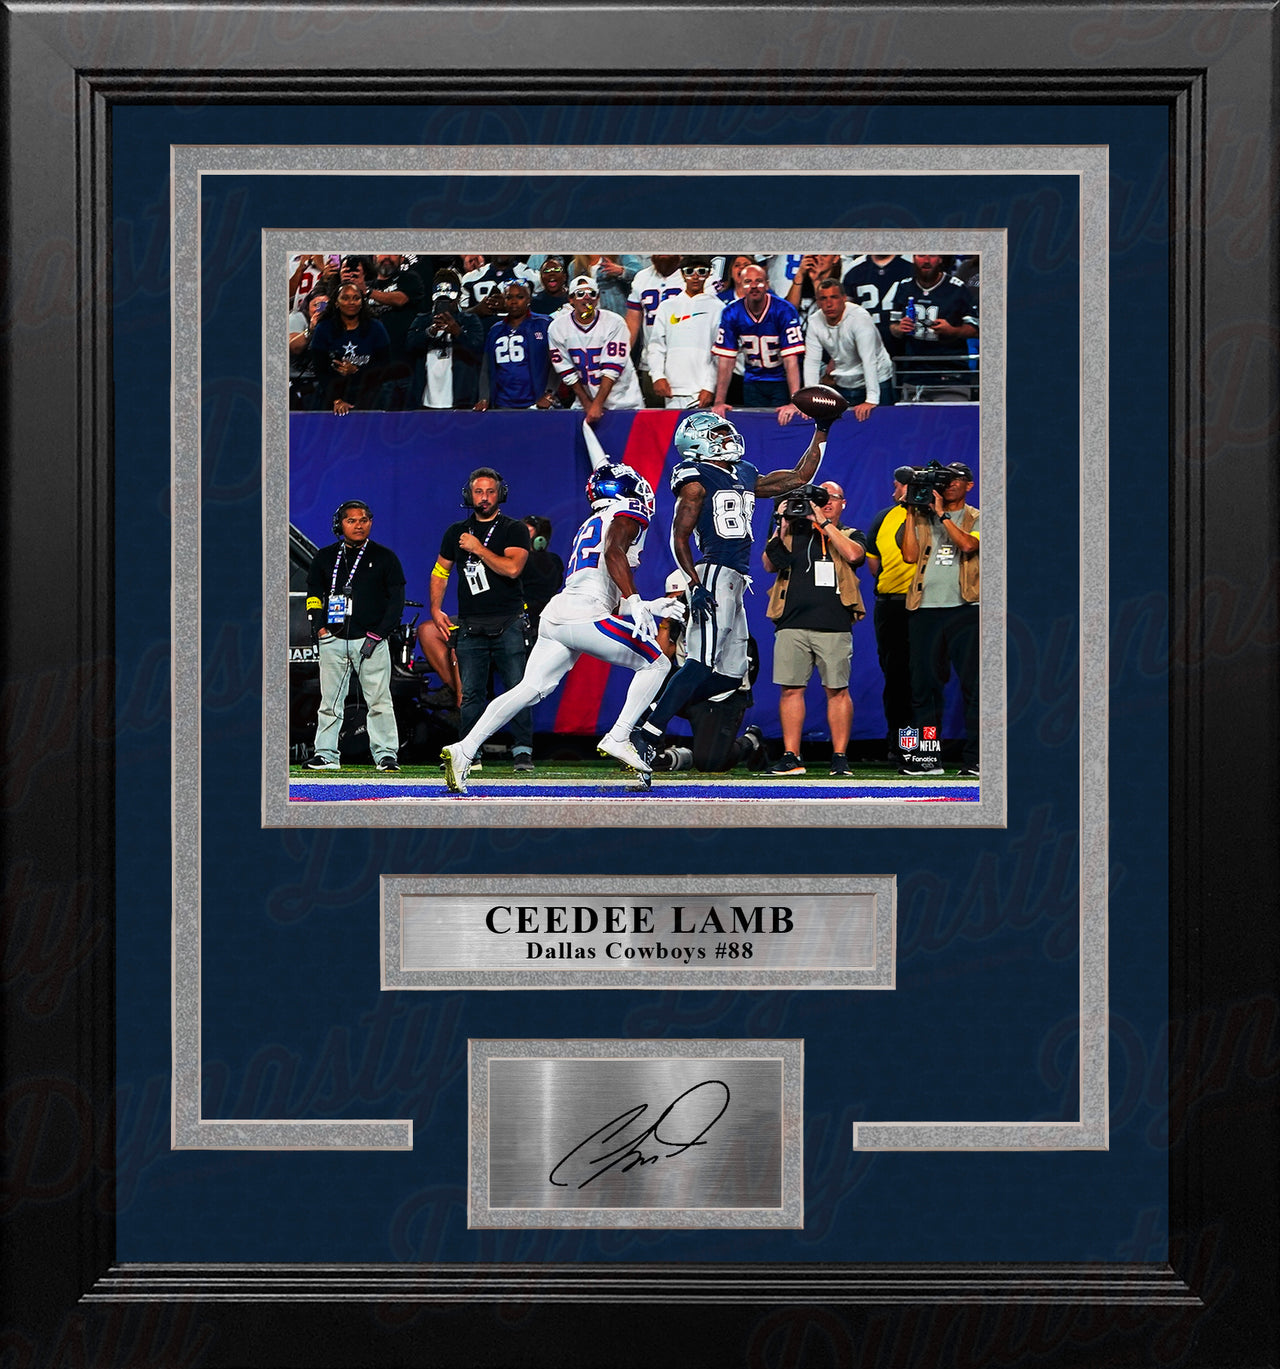 CeeDee Lamb One-Handed Touchdown Dallas Cowboys 8x10 Framed Football Photo with Engraved Autograph - Dynasty Sports & Framing 